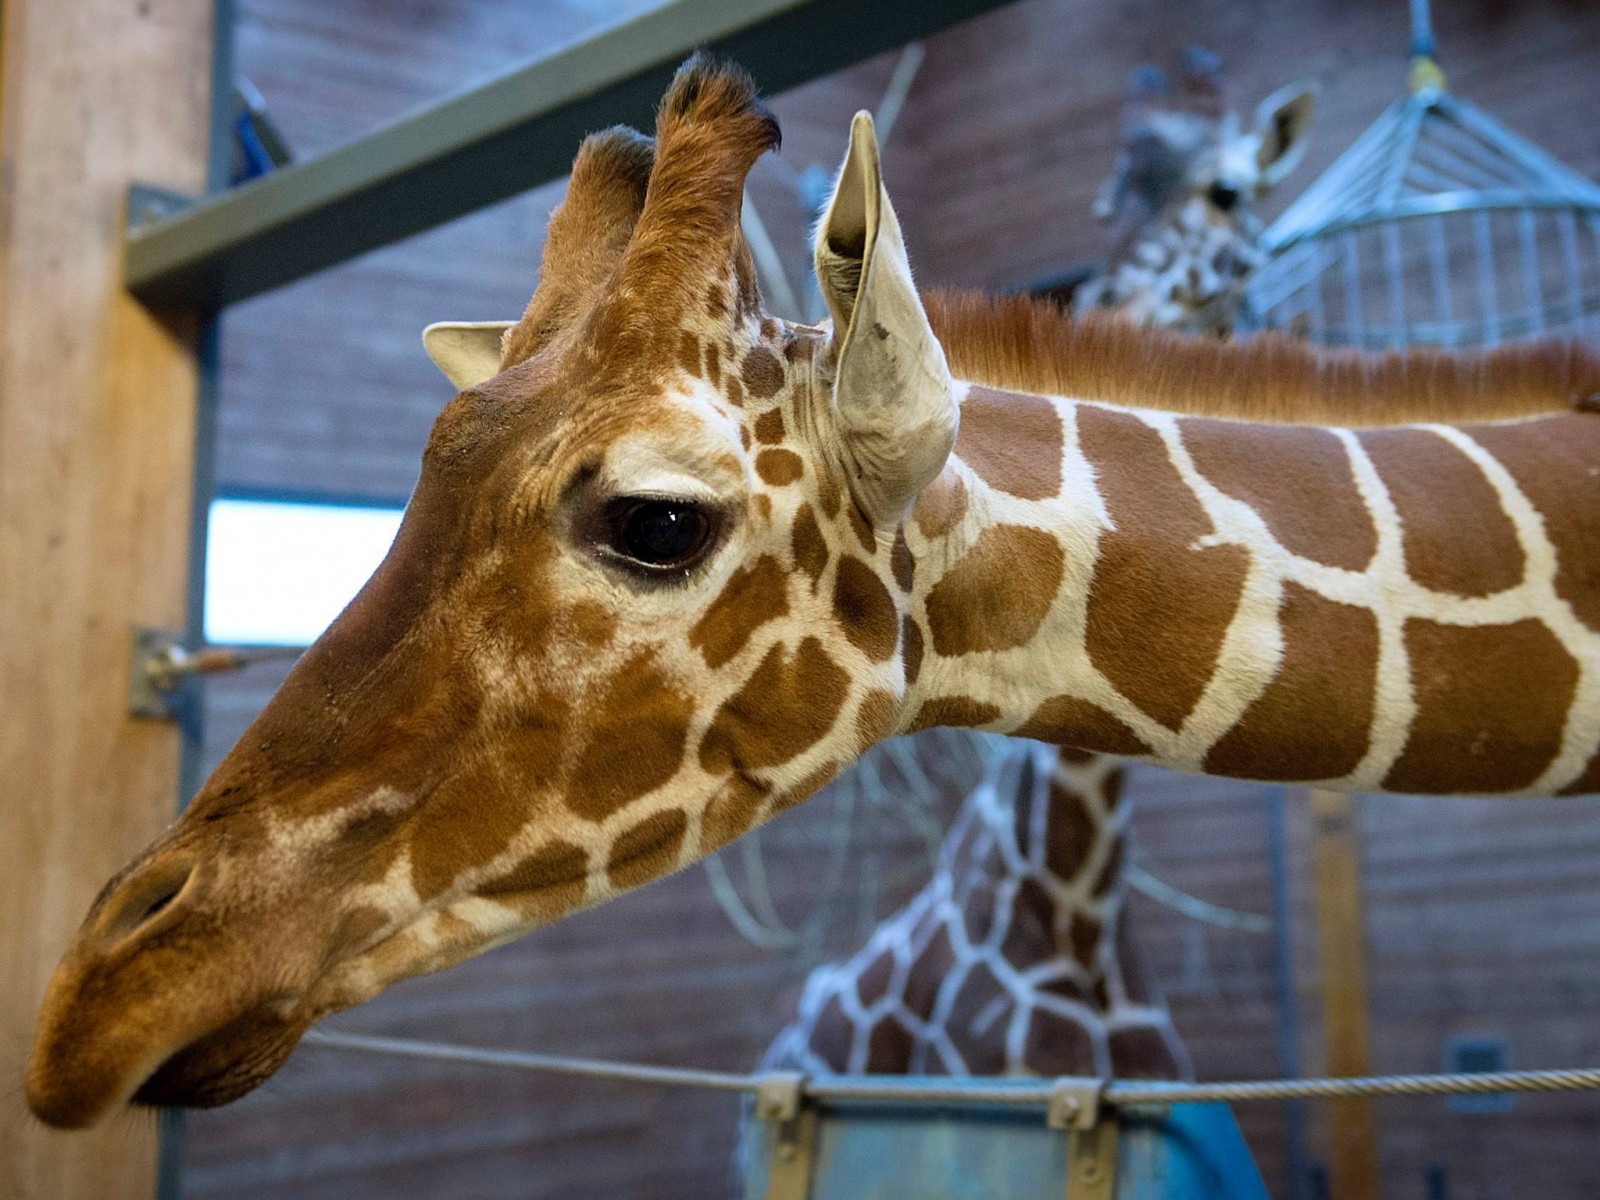 Marius the giraffe before he was euthanized (Photo Credit: AFP/Getty)